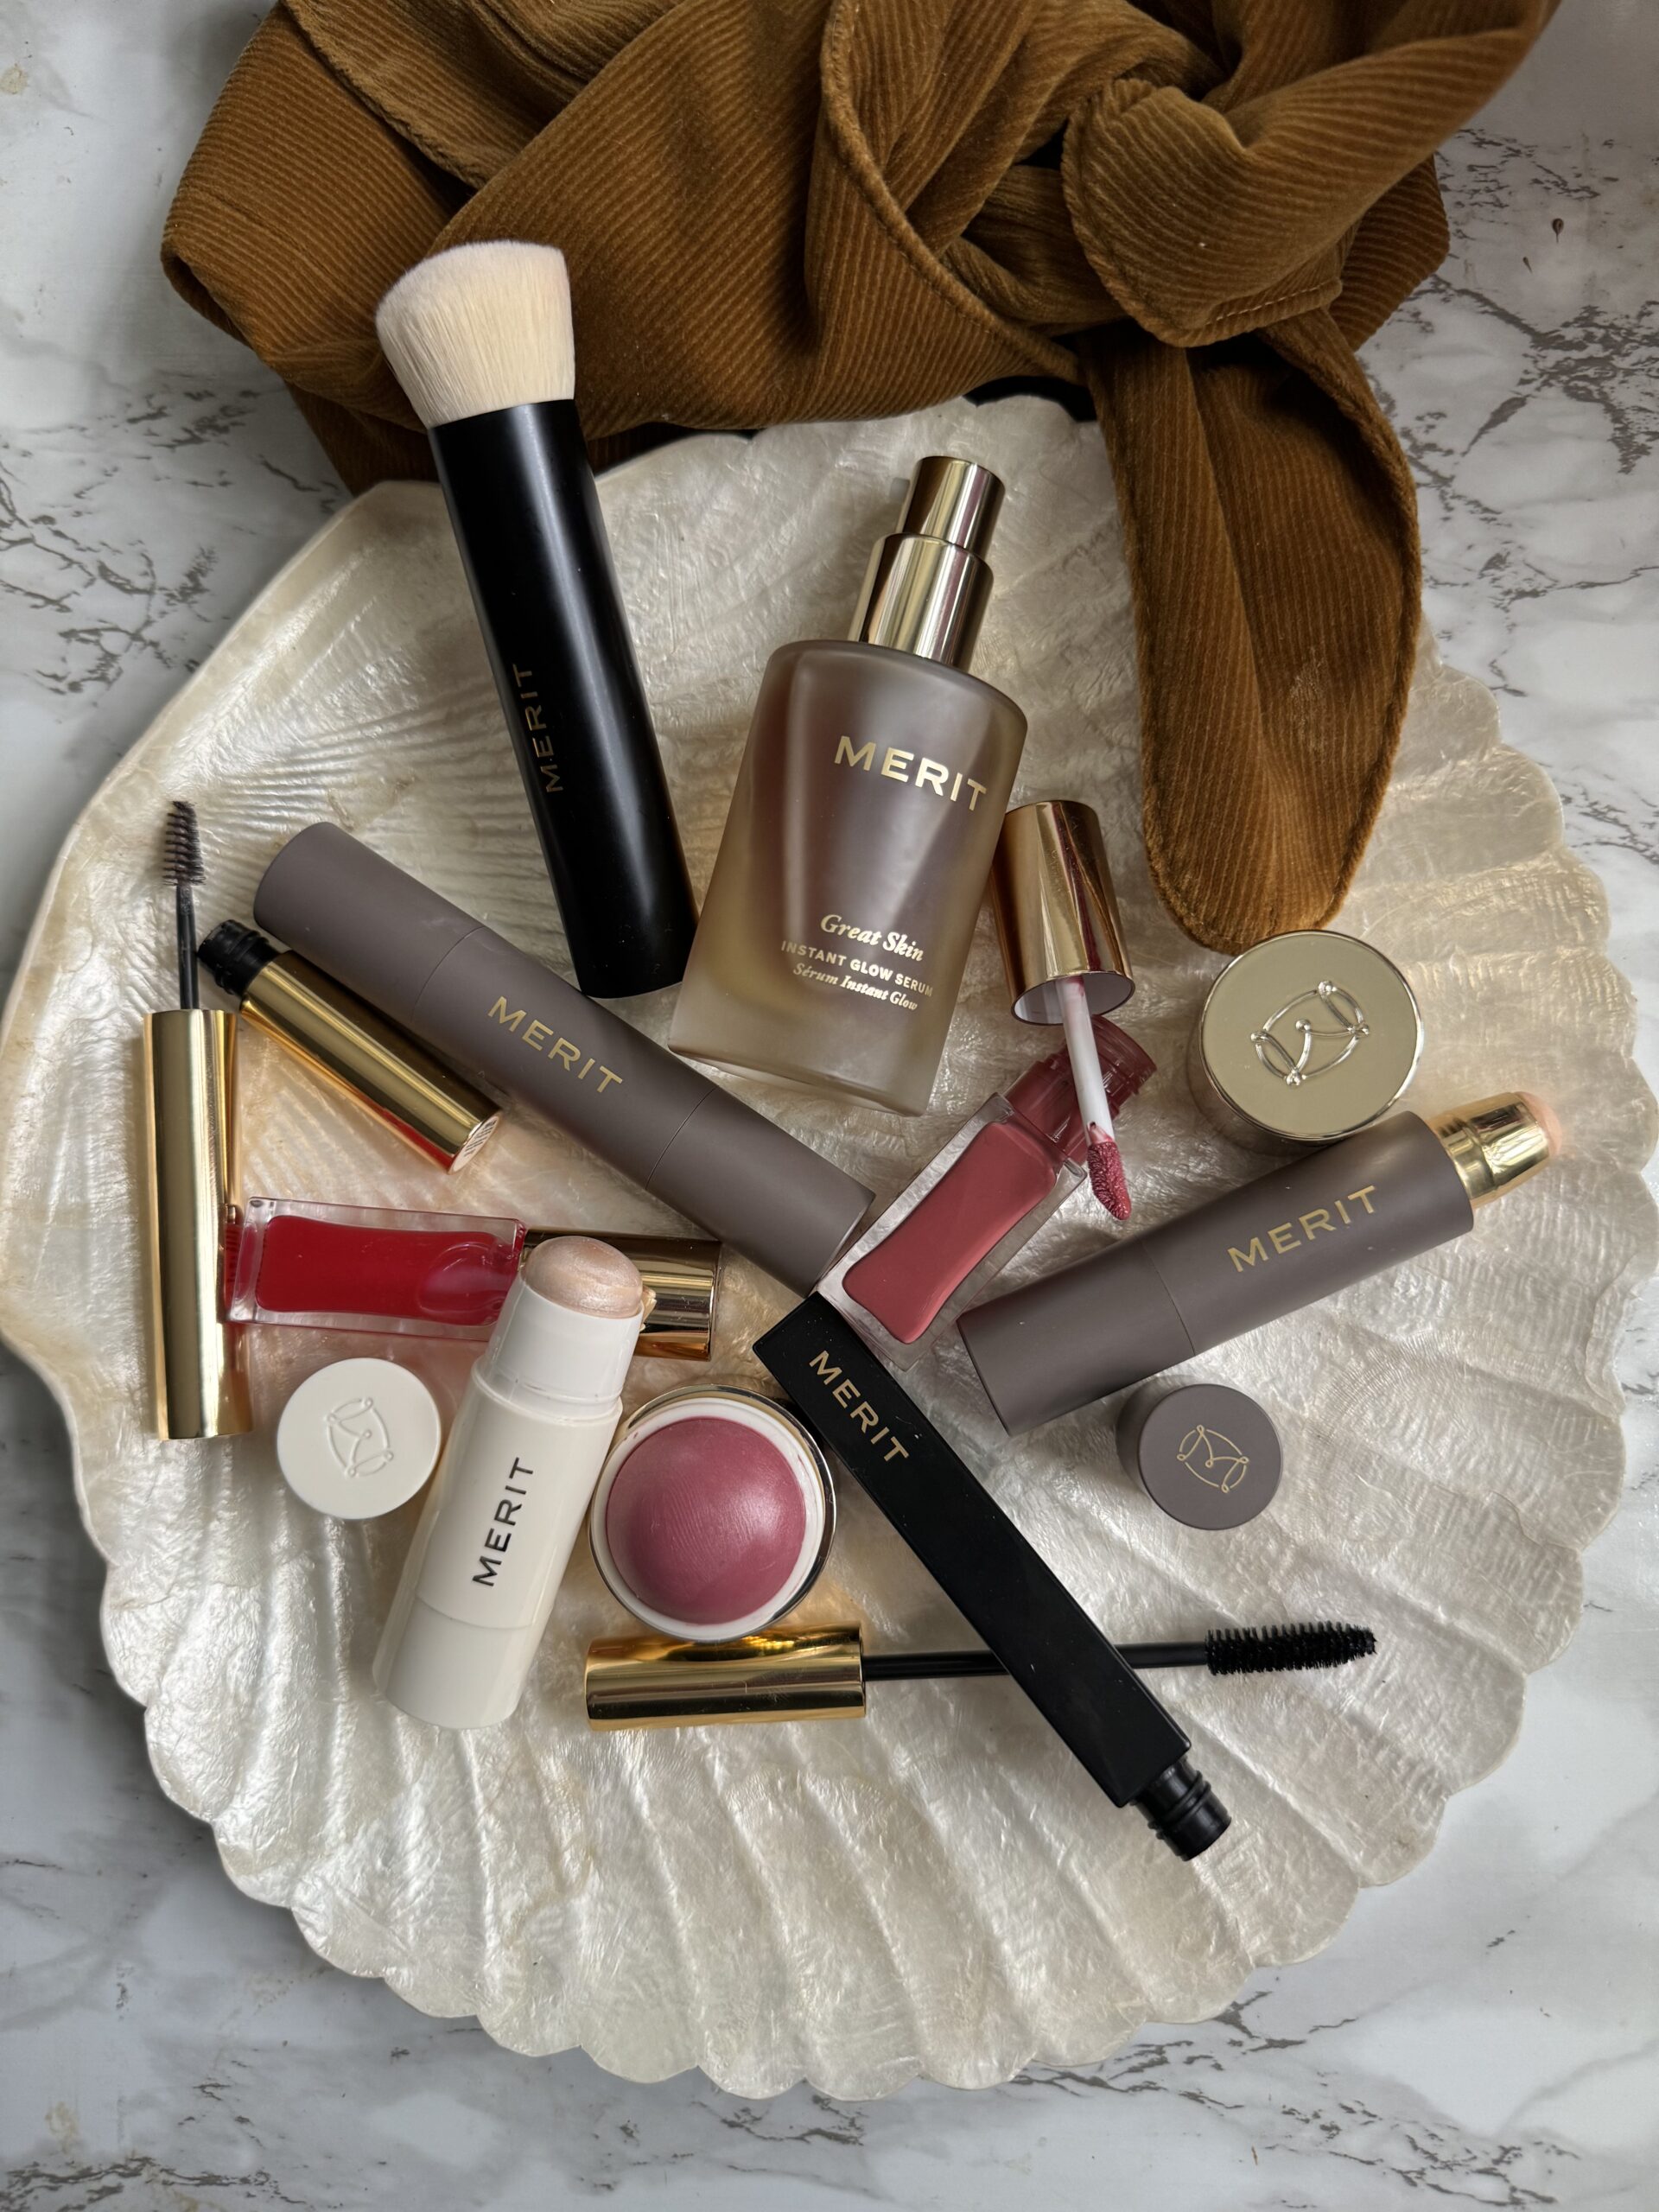 An assortment of cosmetics including foundation, lipstick, and mascara artfully arranged on a white surface.